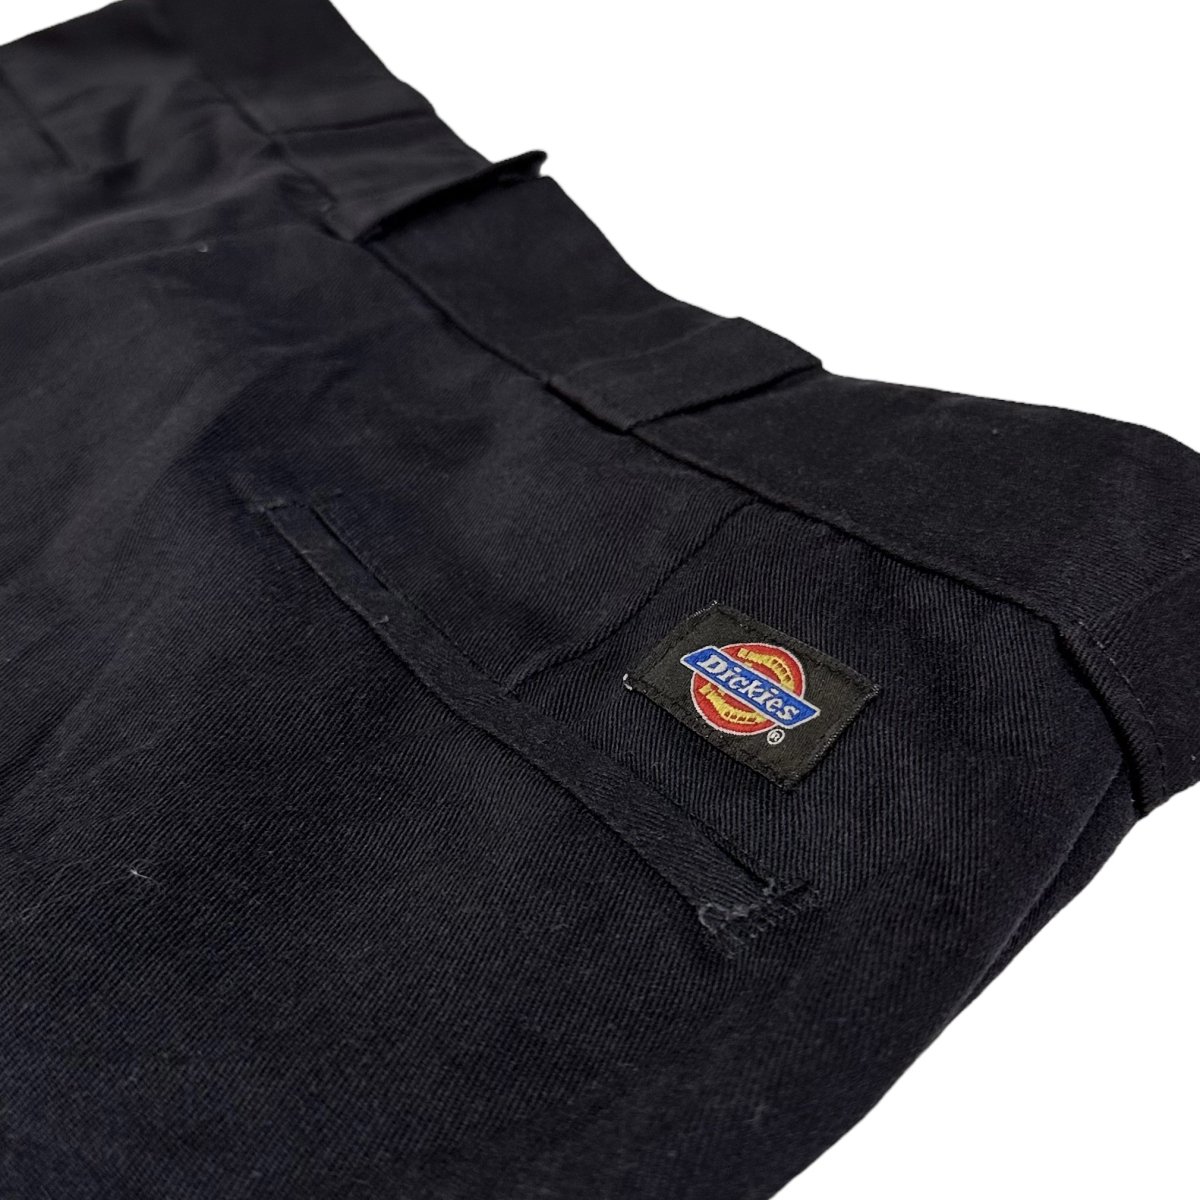 USA製 90s Dickies 874 Work Pants 黒 W40×L30 ディッキーズ ワーク